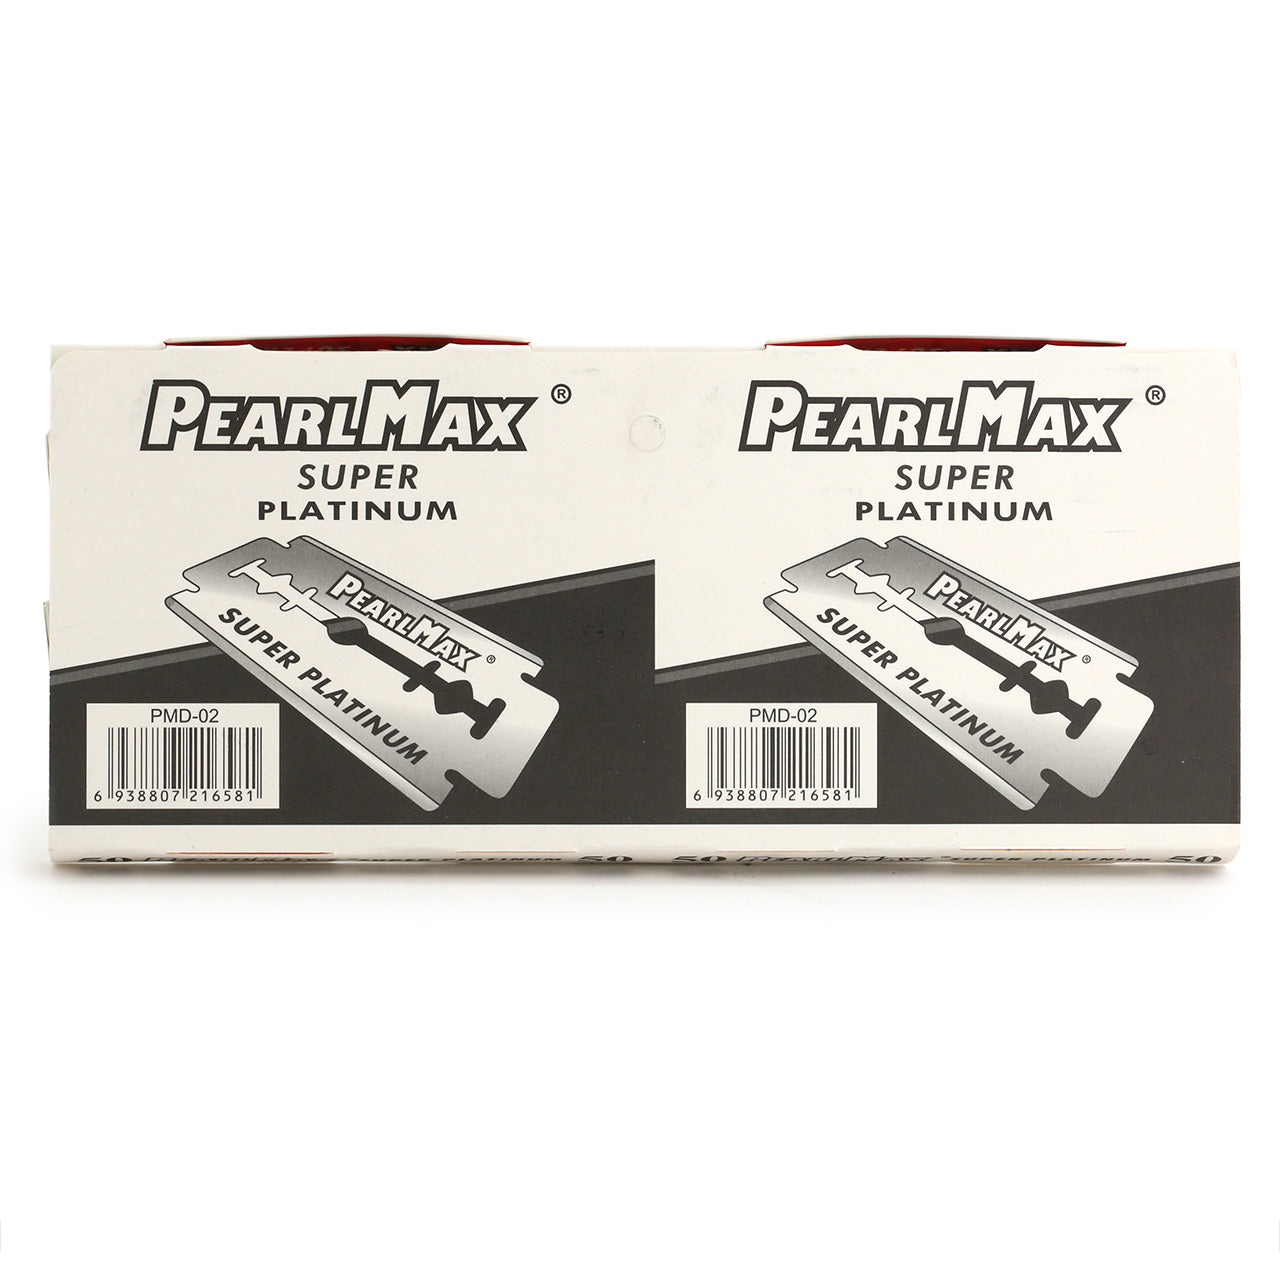 PearlMax pack of 100 double-edge blades